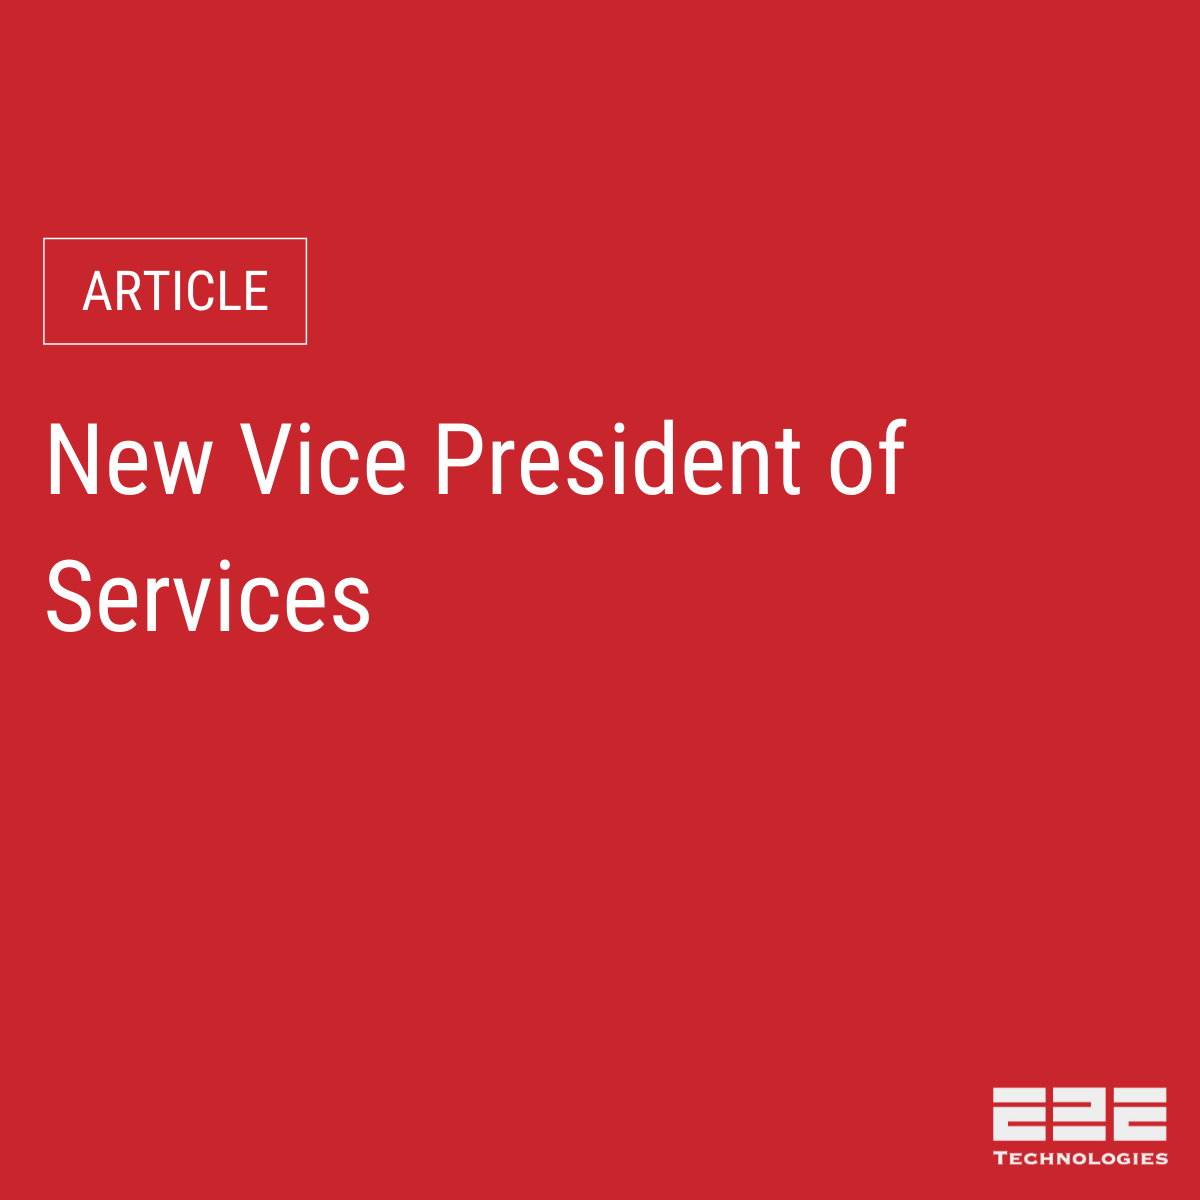 New Vice President of Services